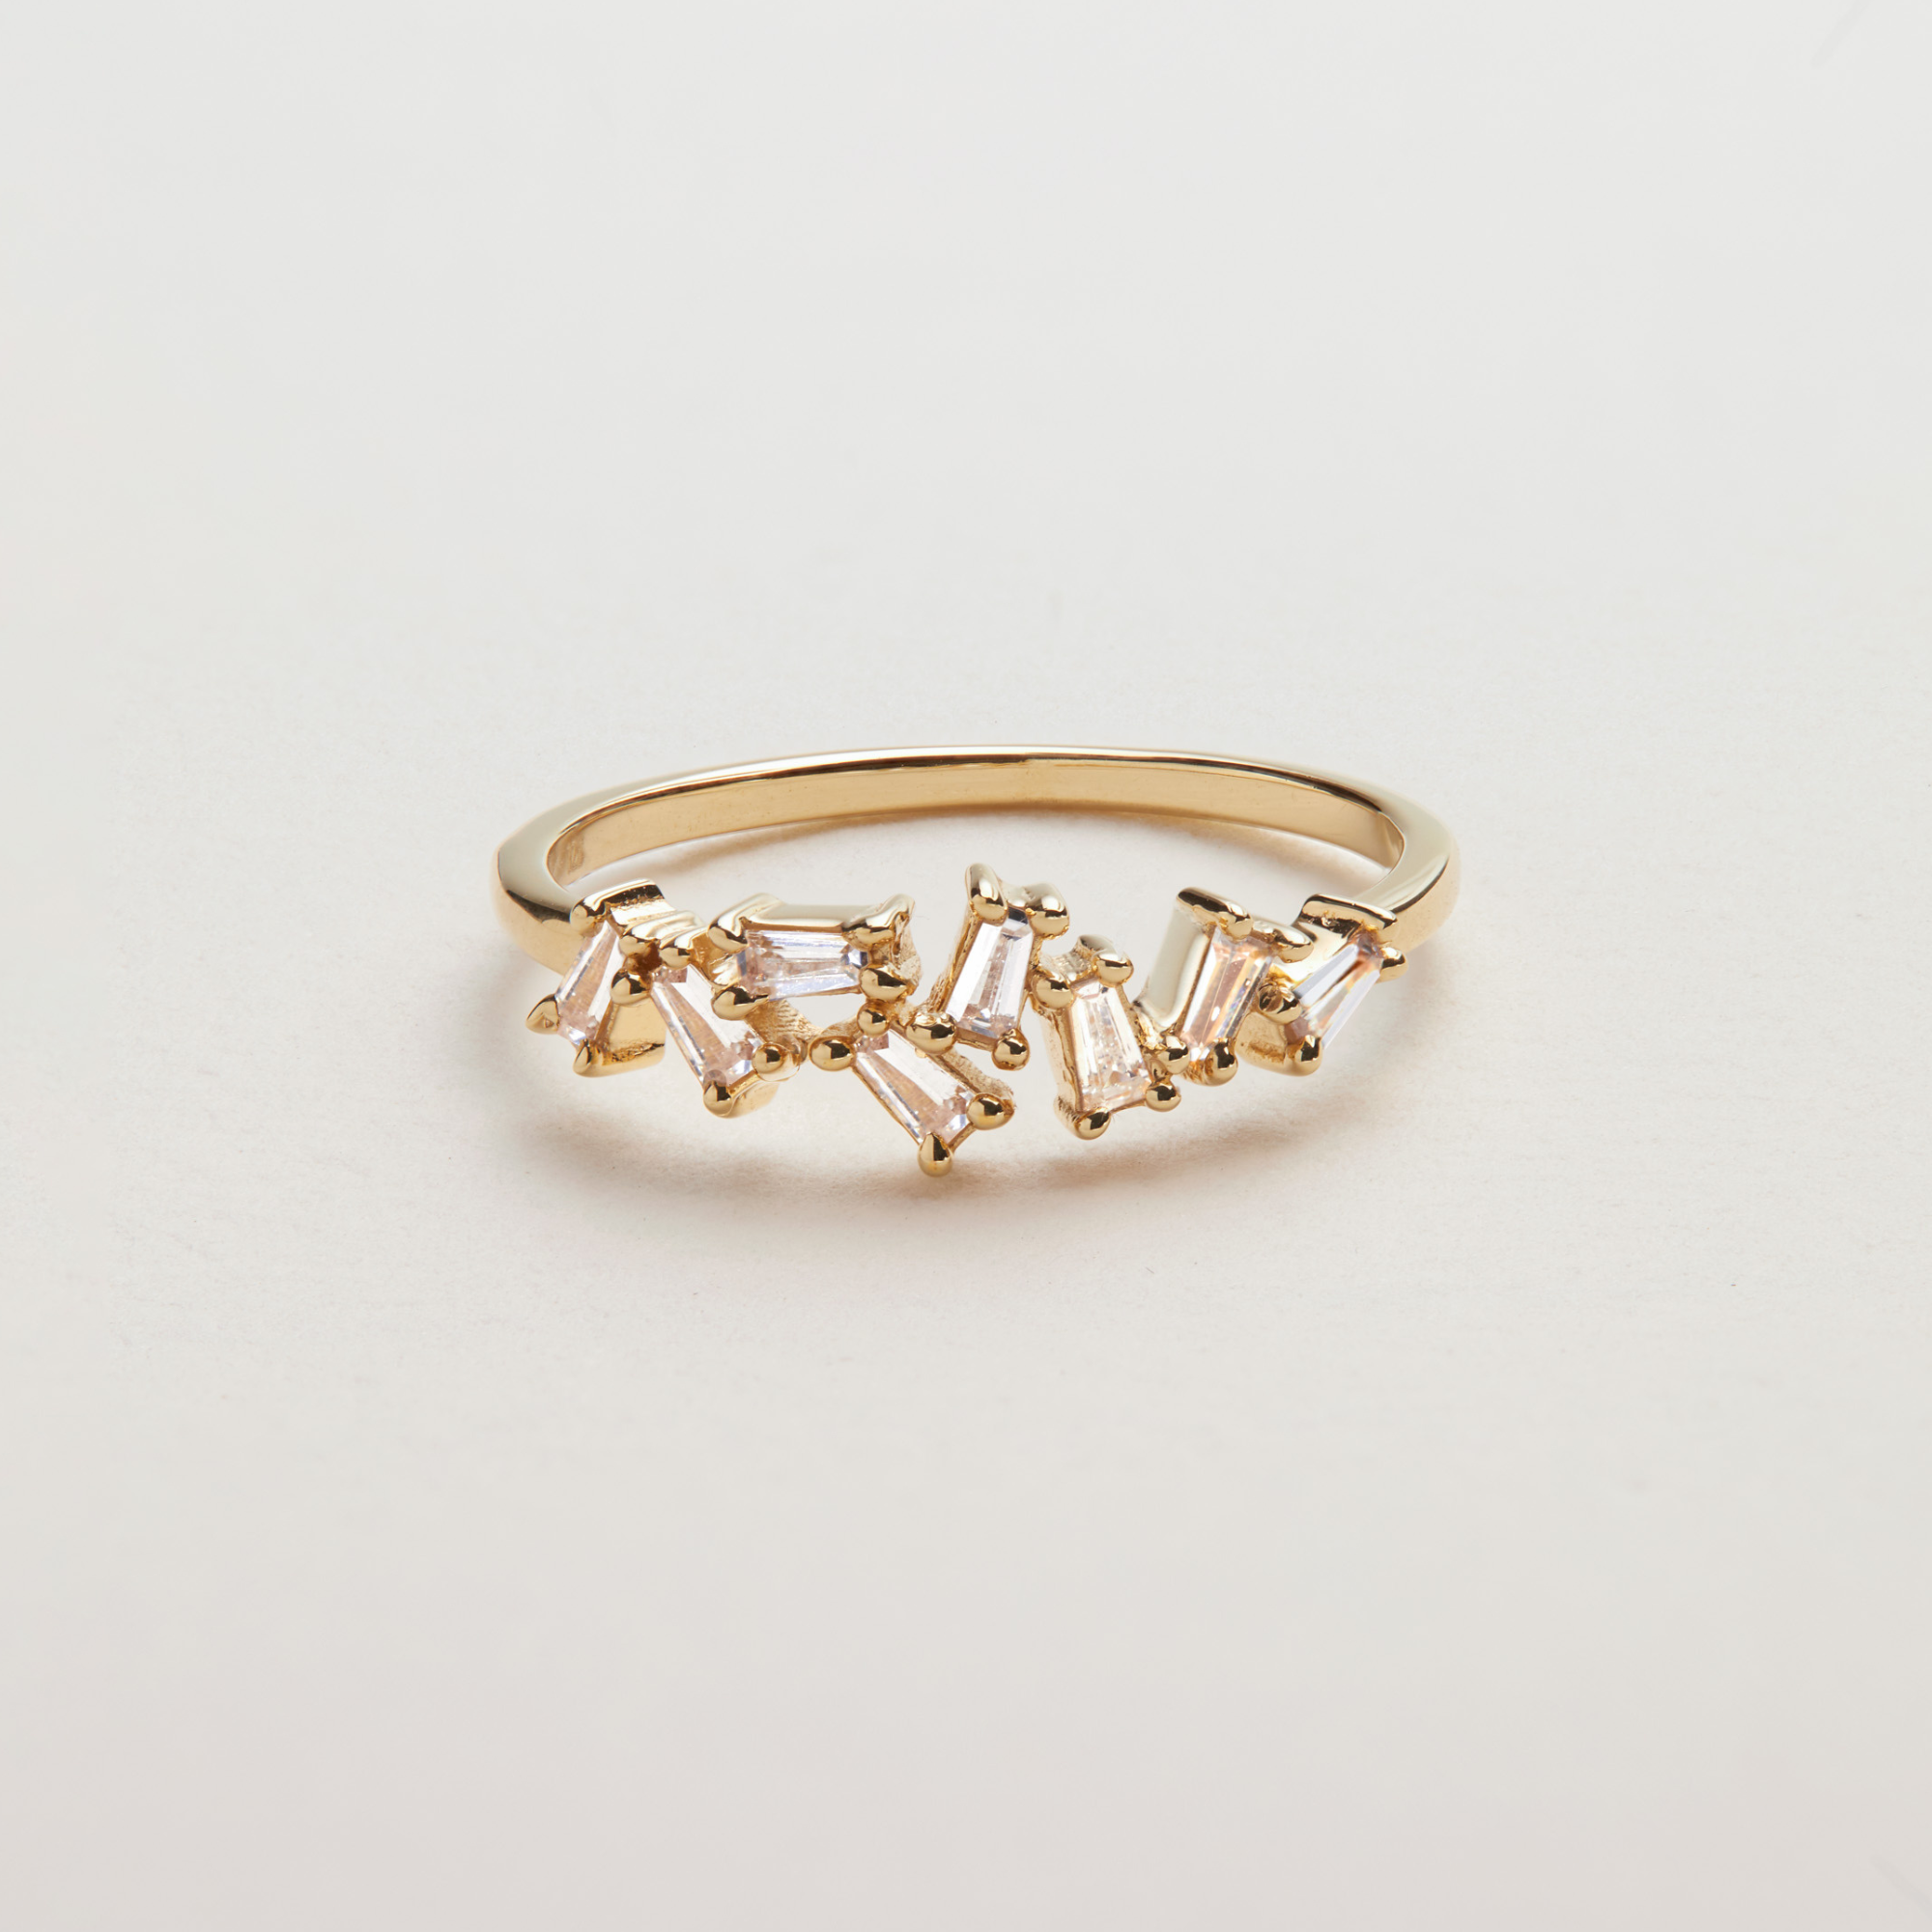 Gold diamond style baguette ring on a white surface